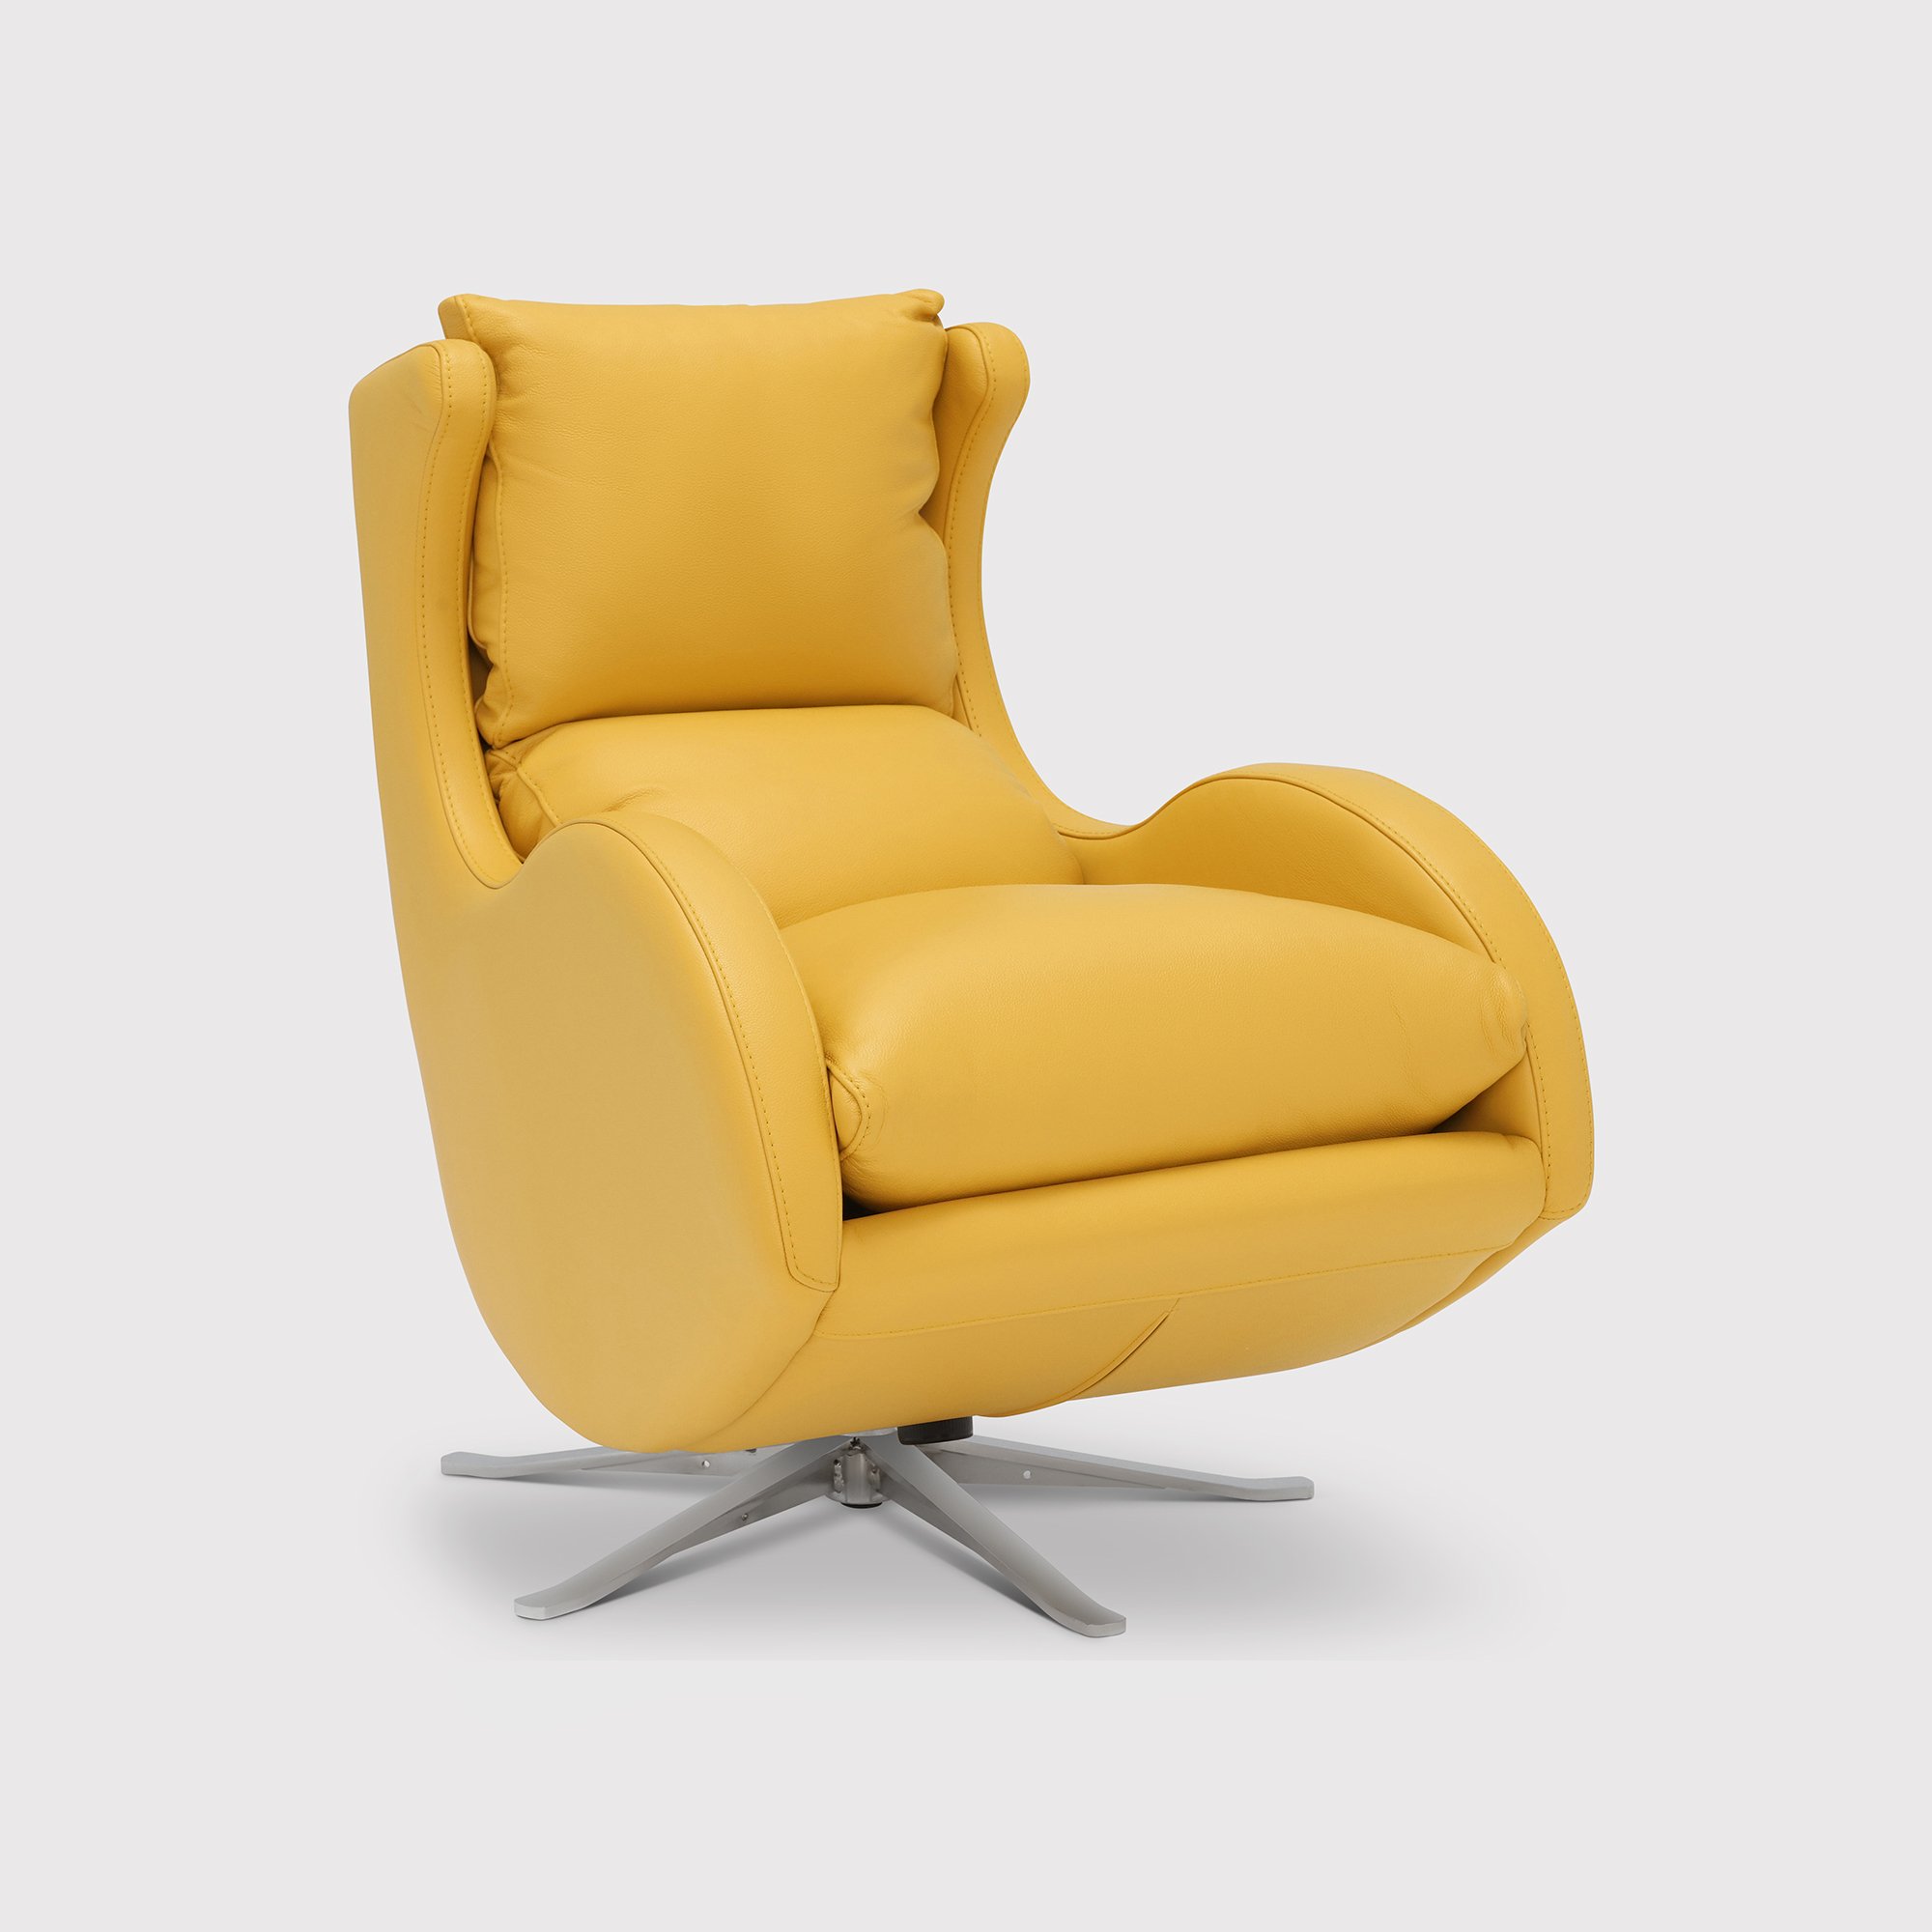 Lenny Rocking & Swivelling Armchair, Yellow Leather | Barker & Stonehouse